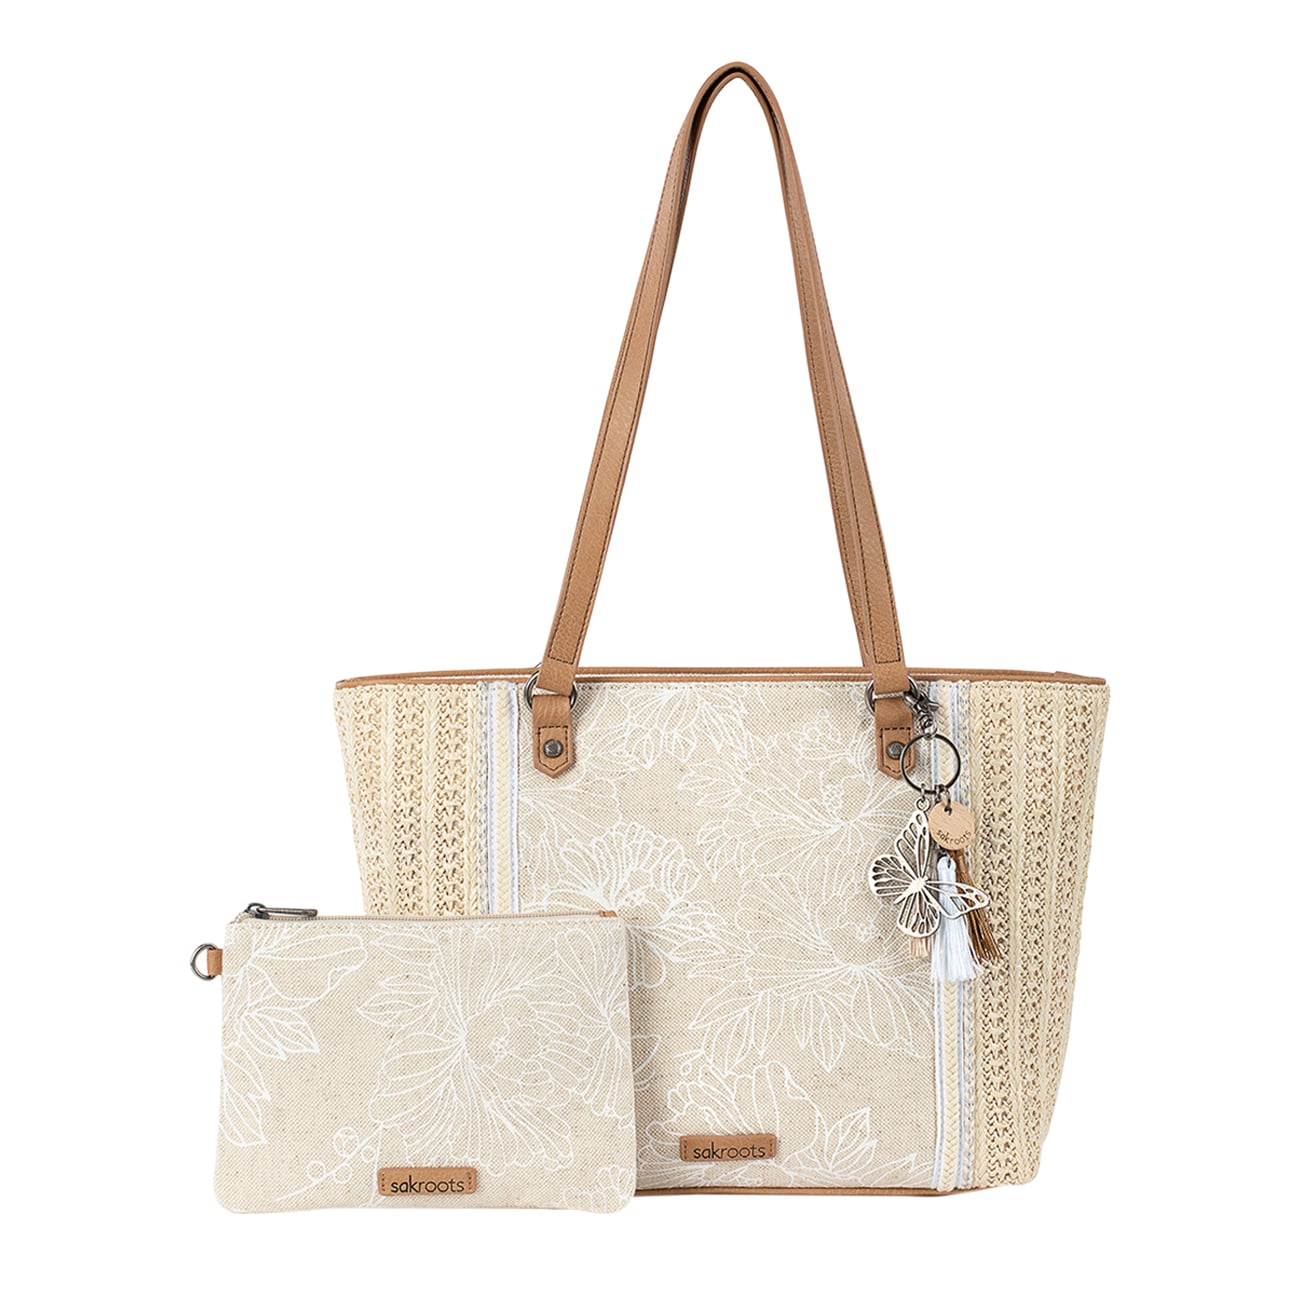 Meadow Straw Tote